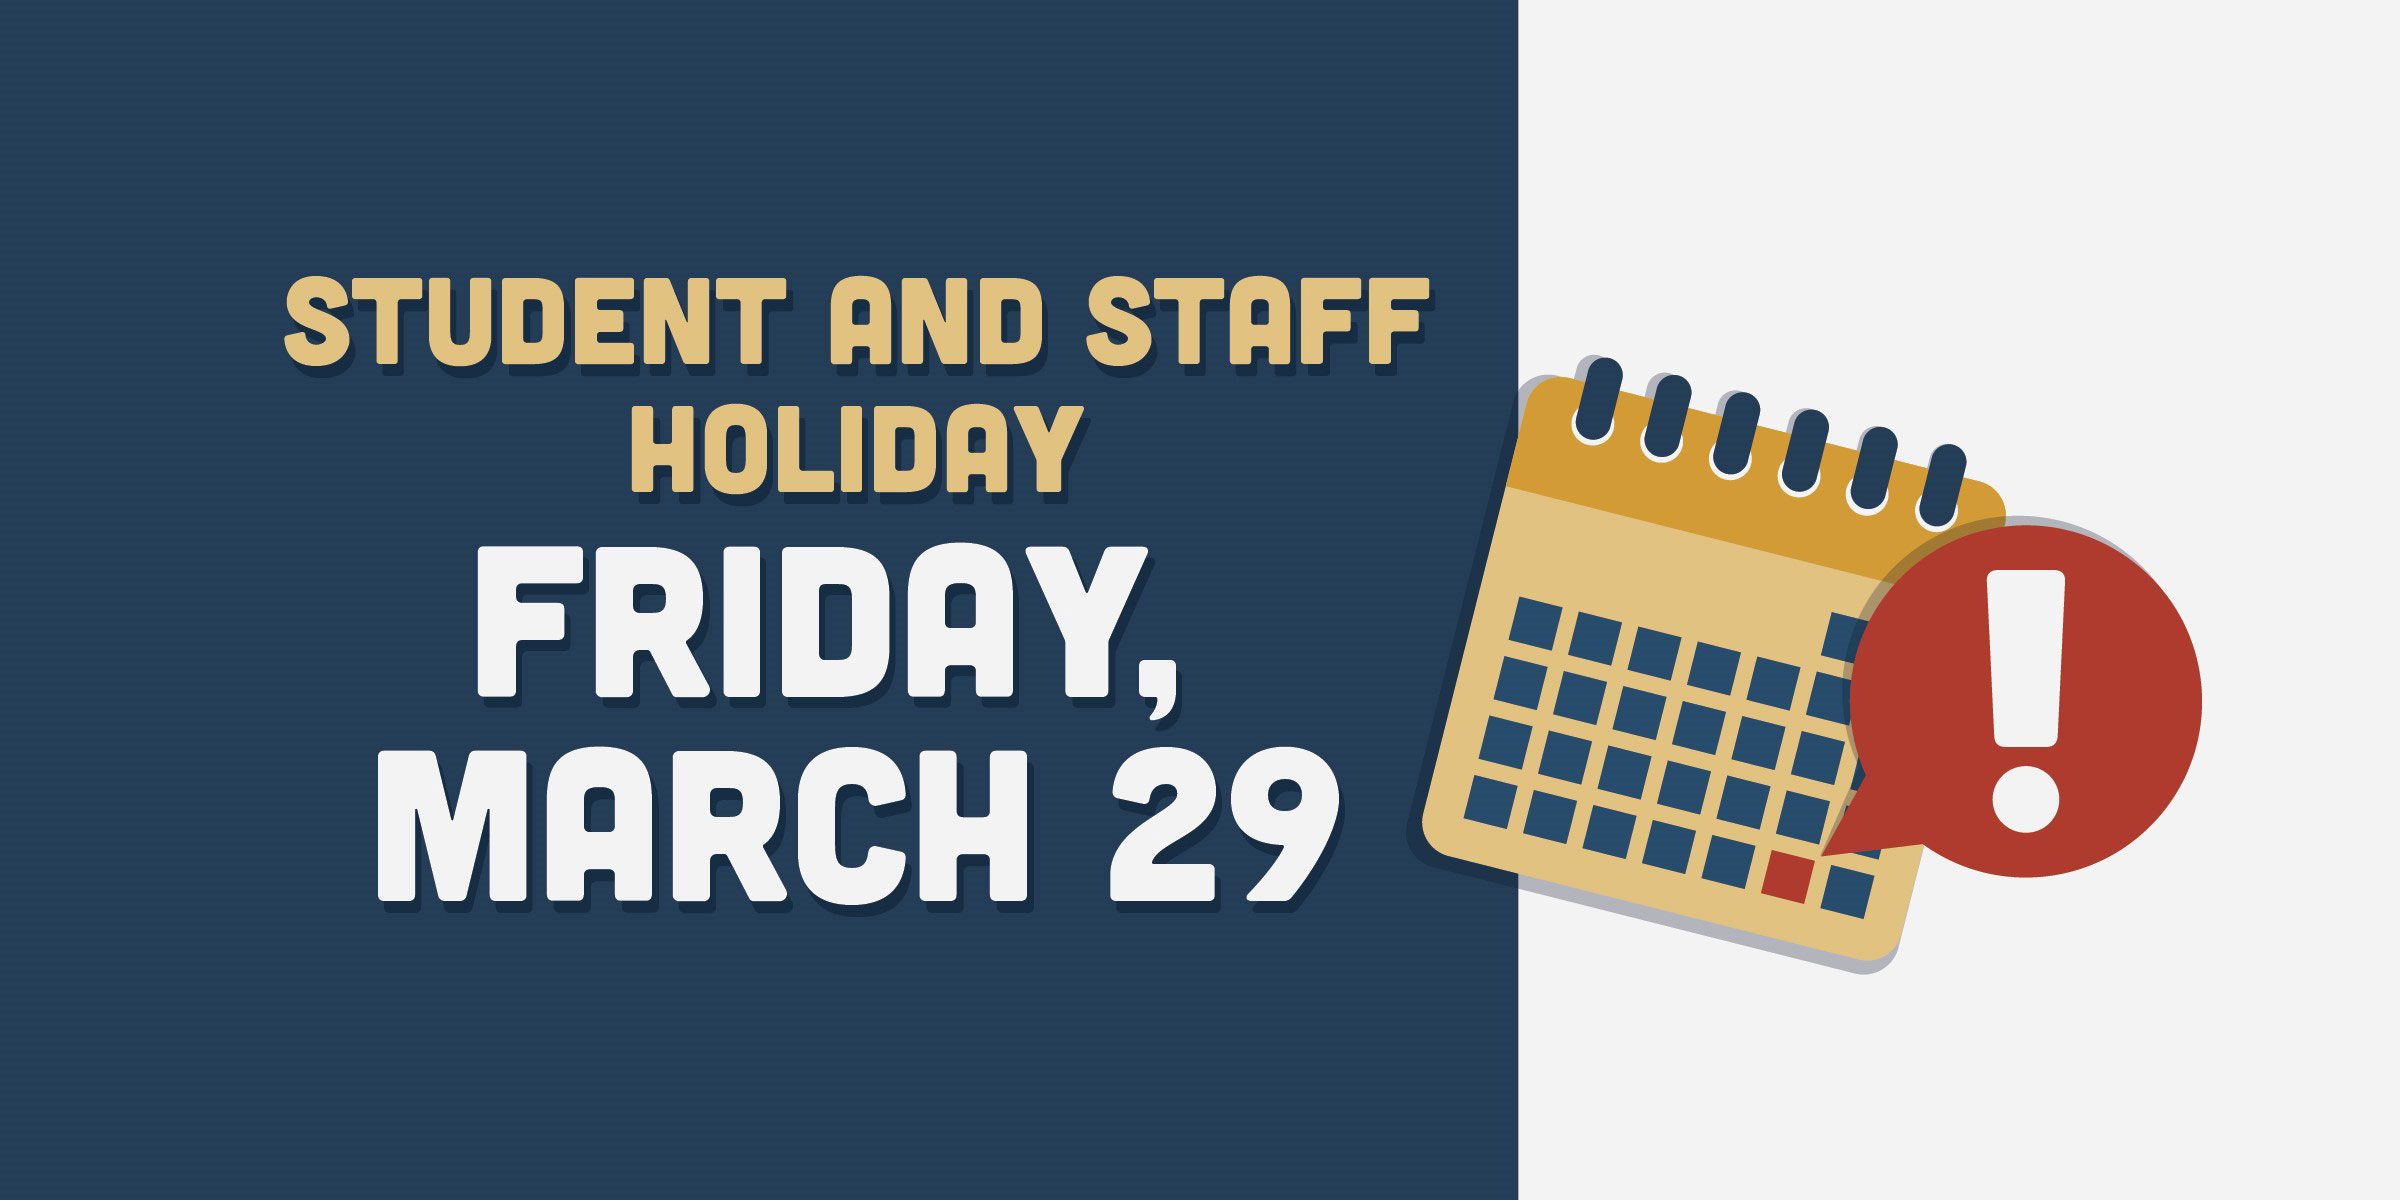 Student and staff Friday, March 29